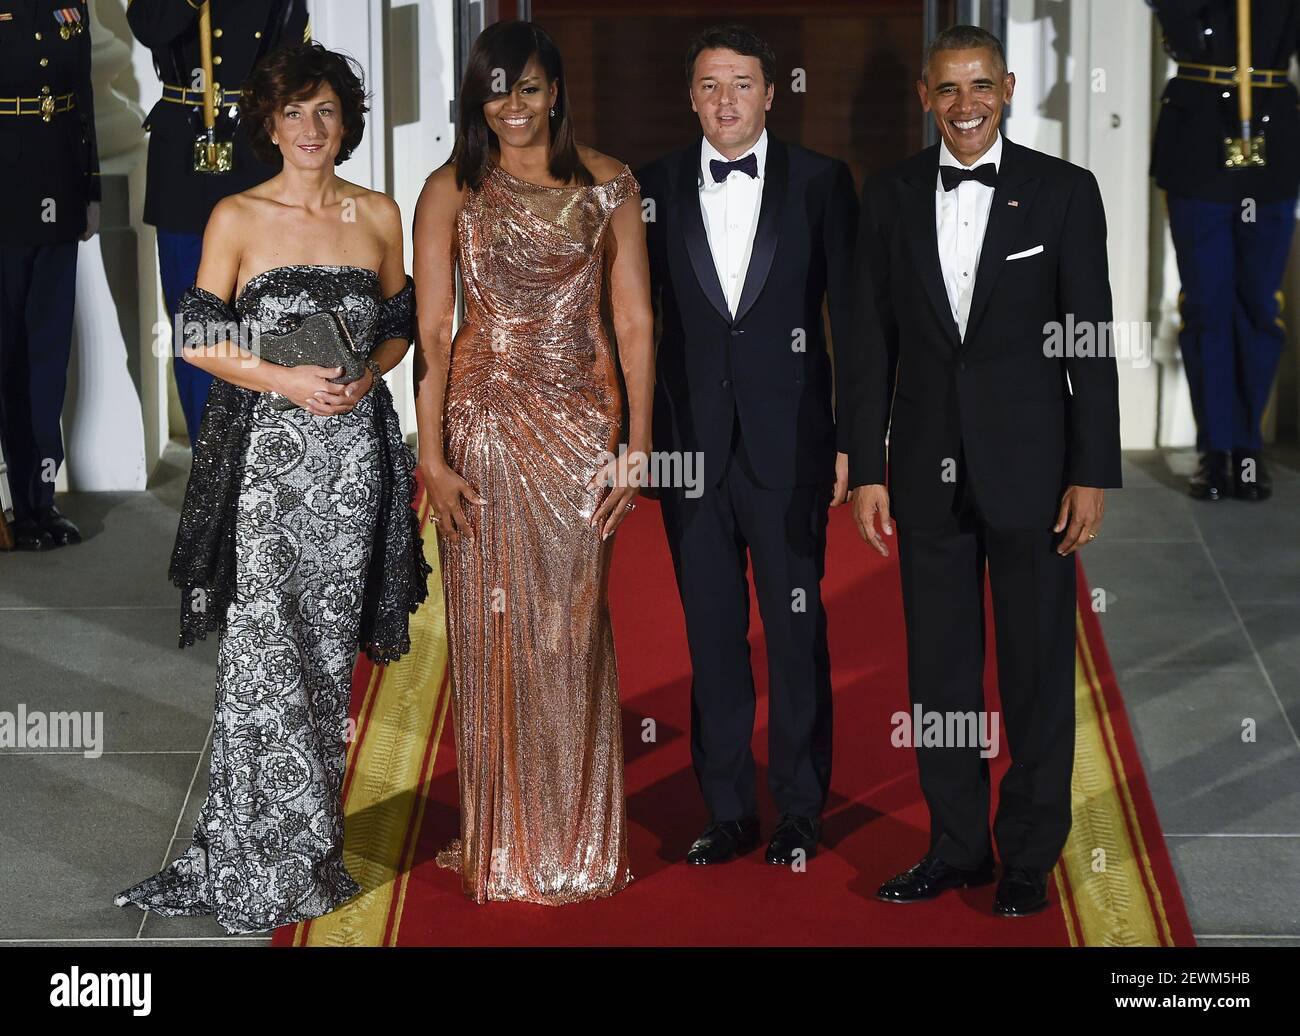 President Barack Obama and First Lady Michelle Obama welcome Prime ...